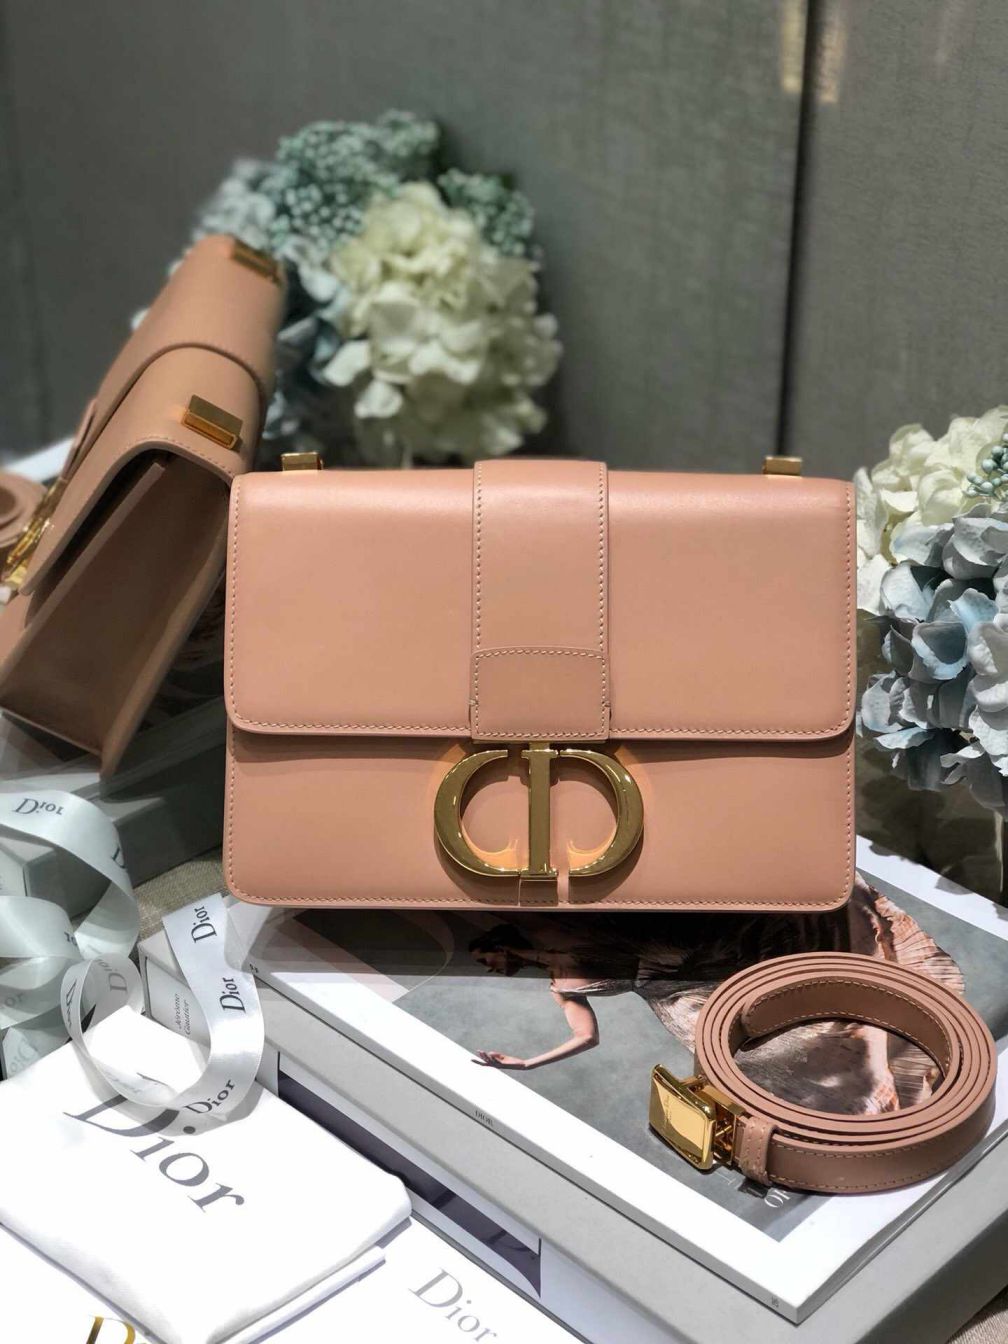 CD 2019 ALL LEATHER 30 MONTAIGNE BAGS PINK